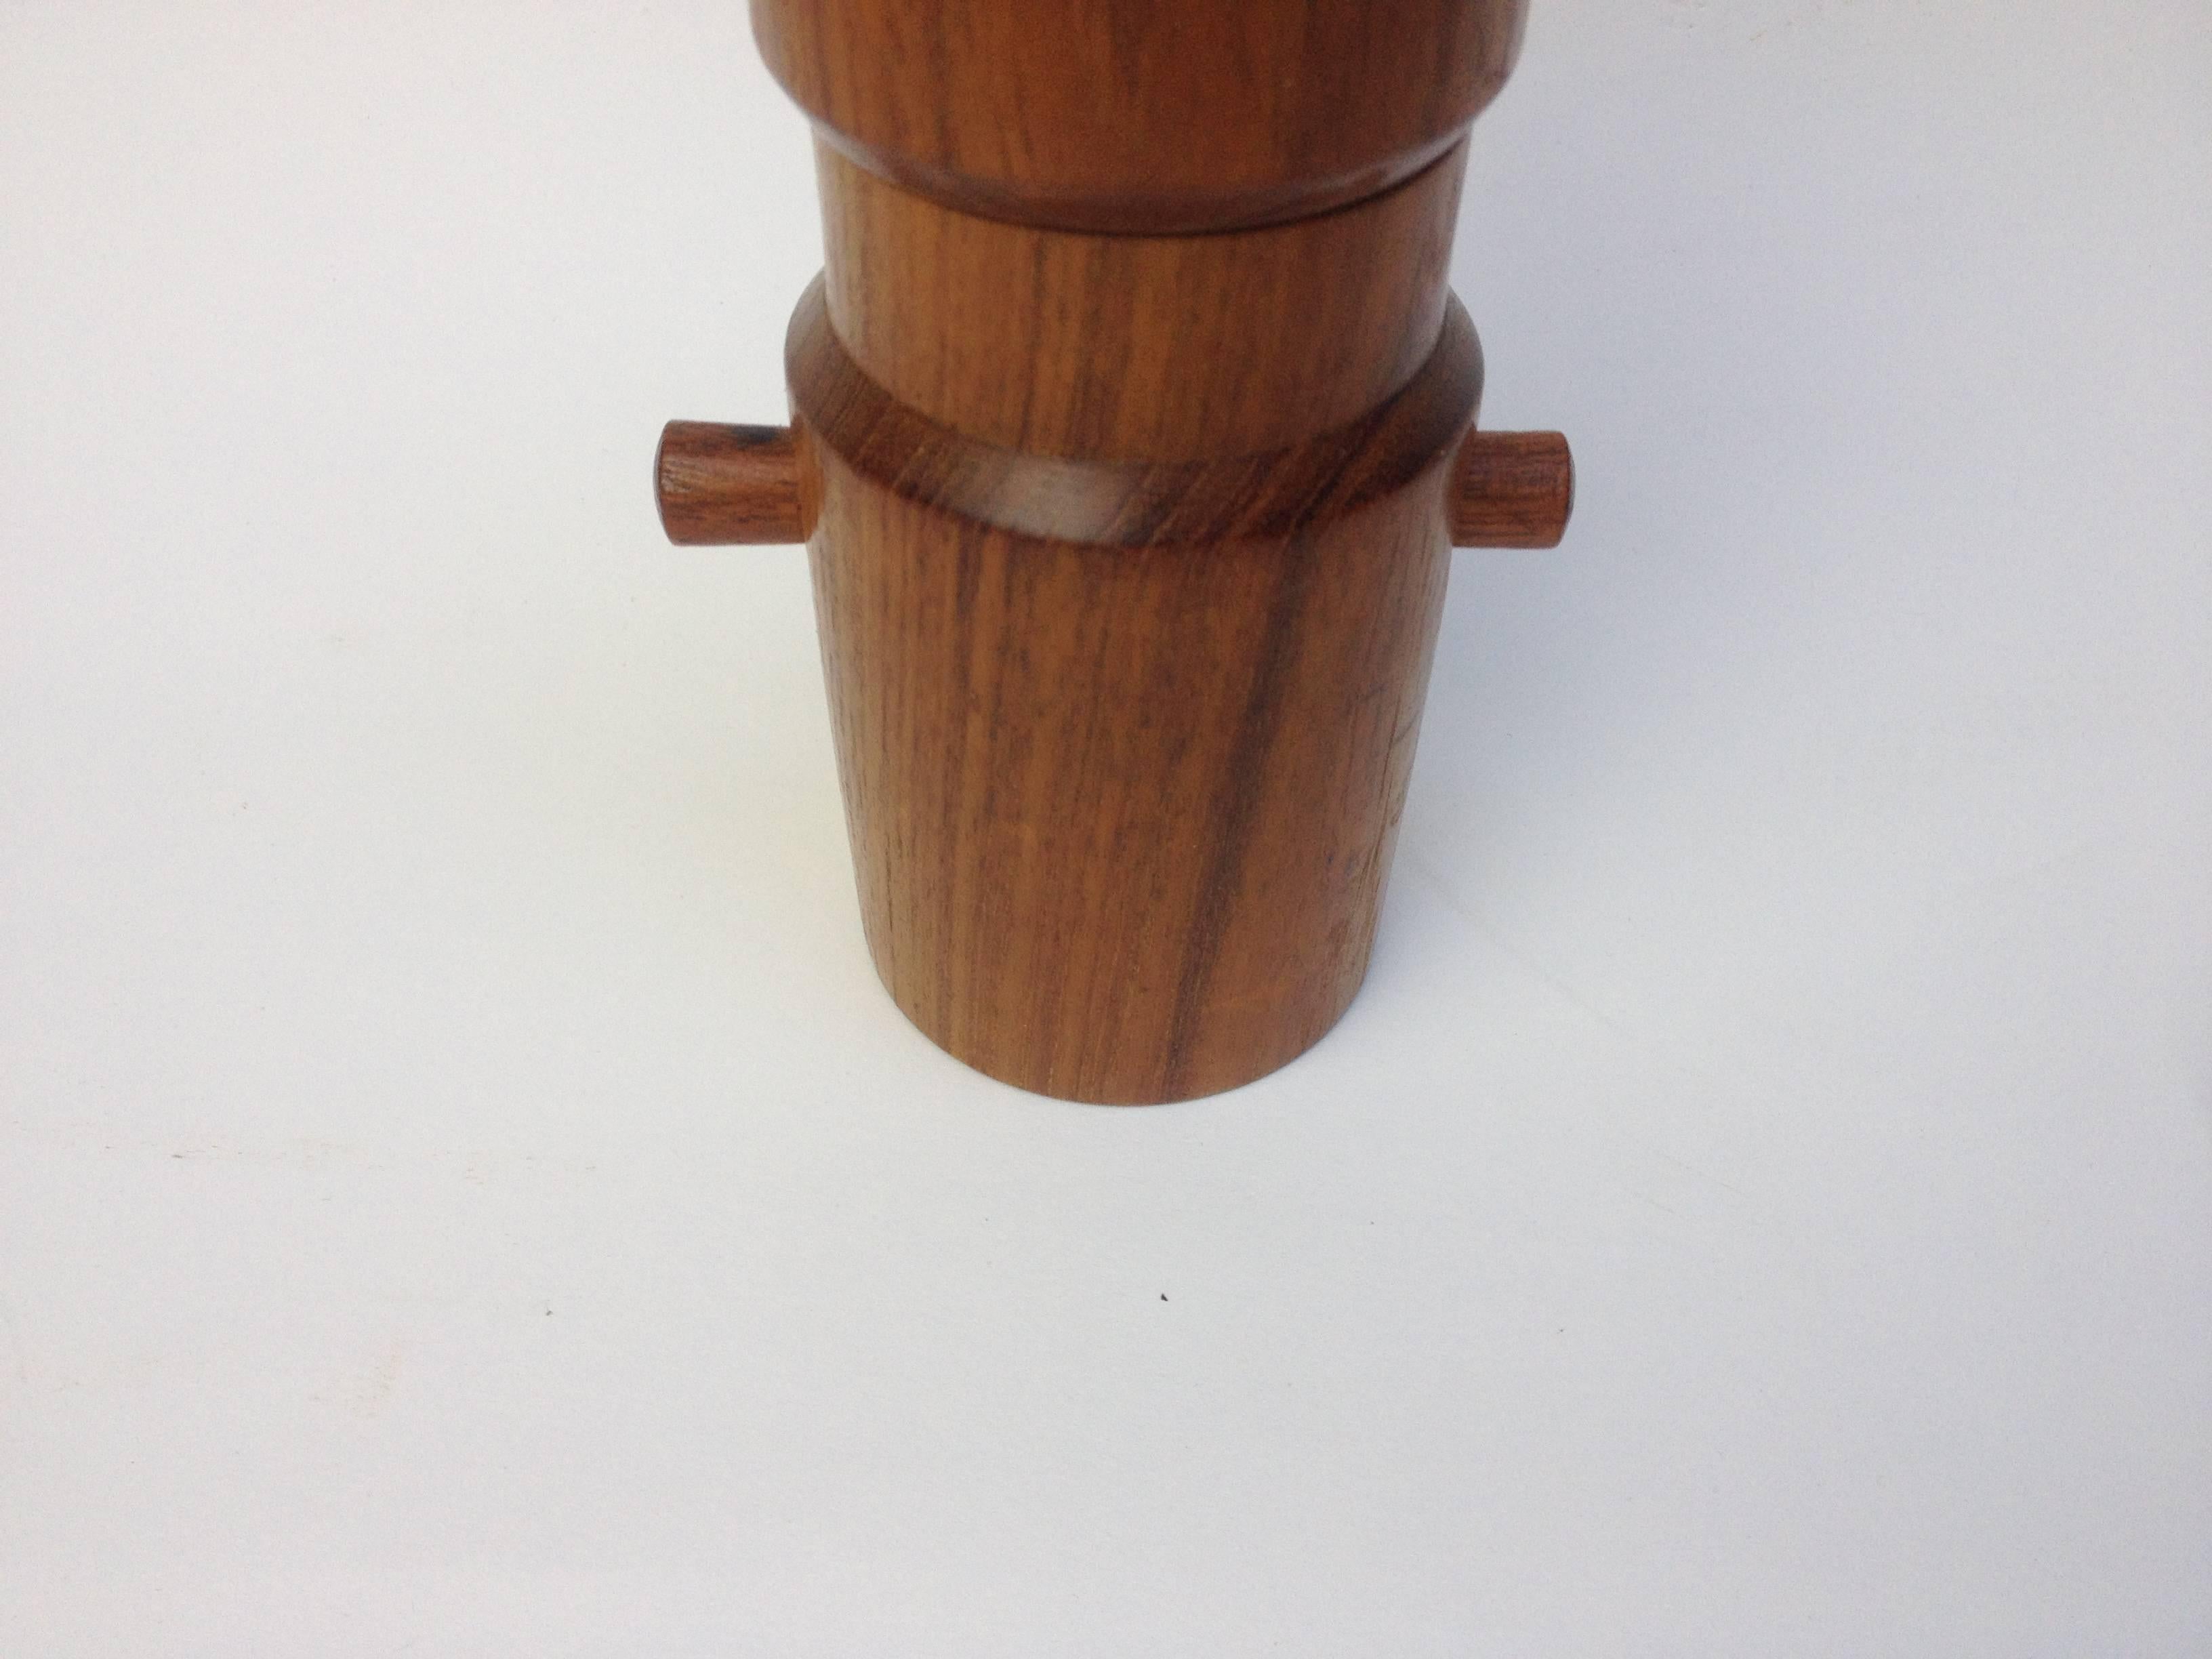 Fabulous teak pepper mill designed by Jens Quistgaard for Dansk Designs, with peugeot grinder, fantastic condition, form and function, true works of art. The mechanism works well.